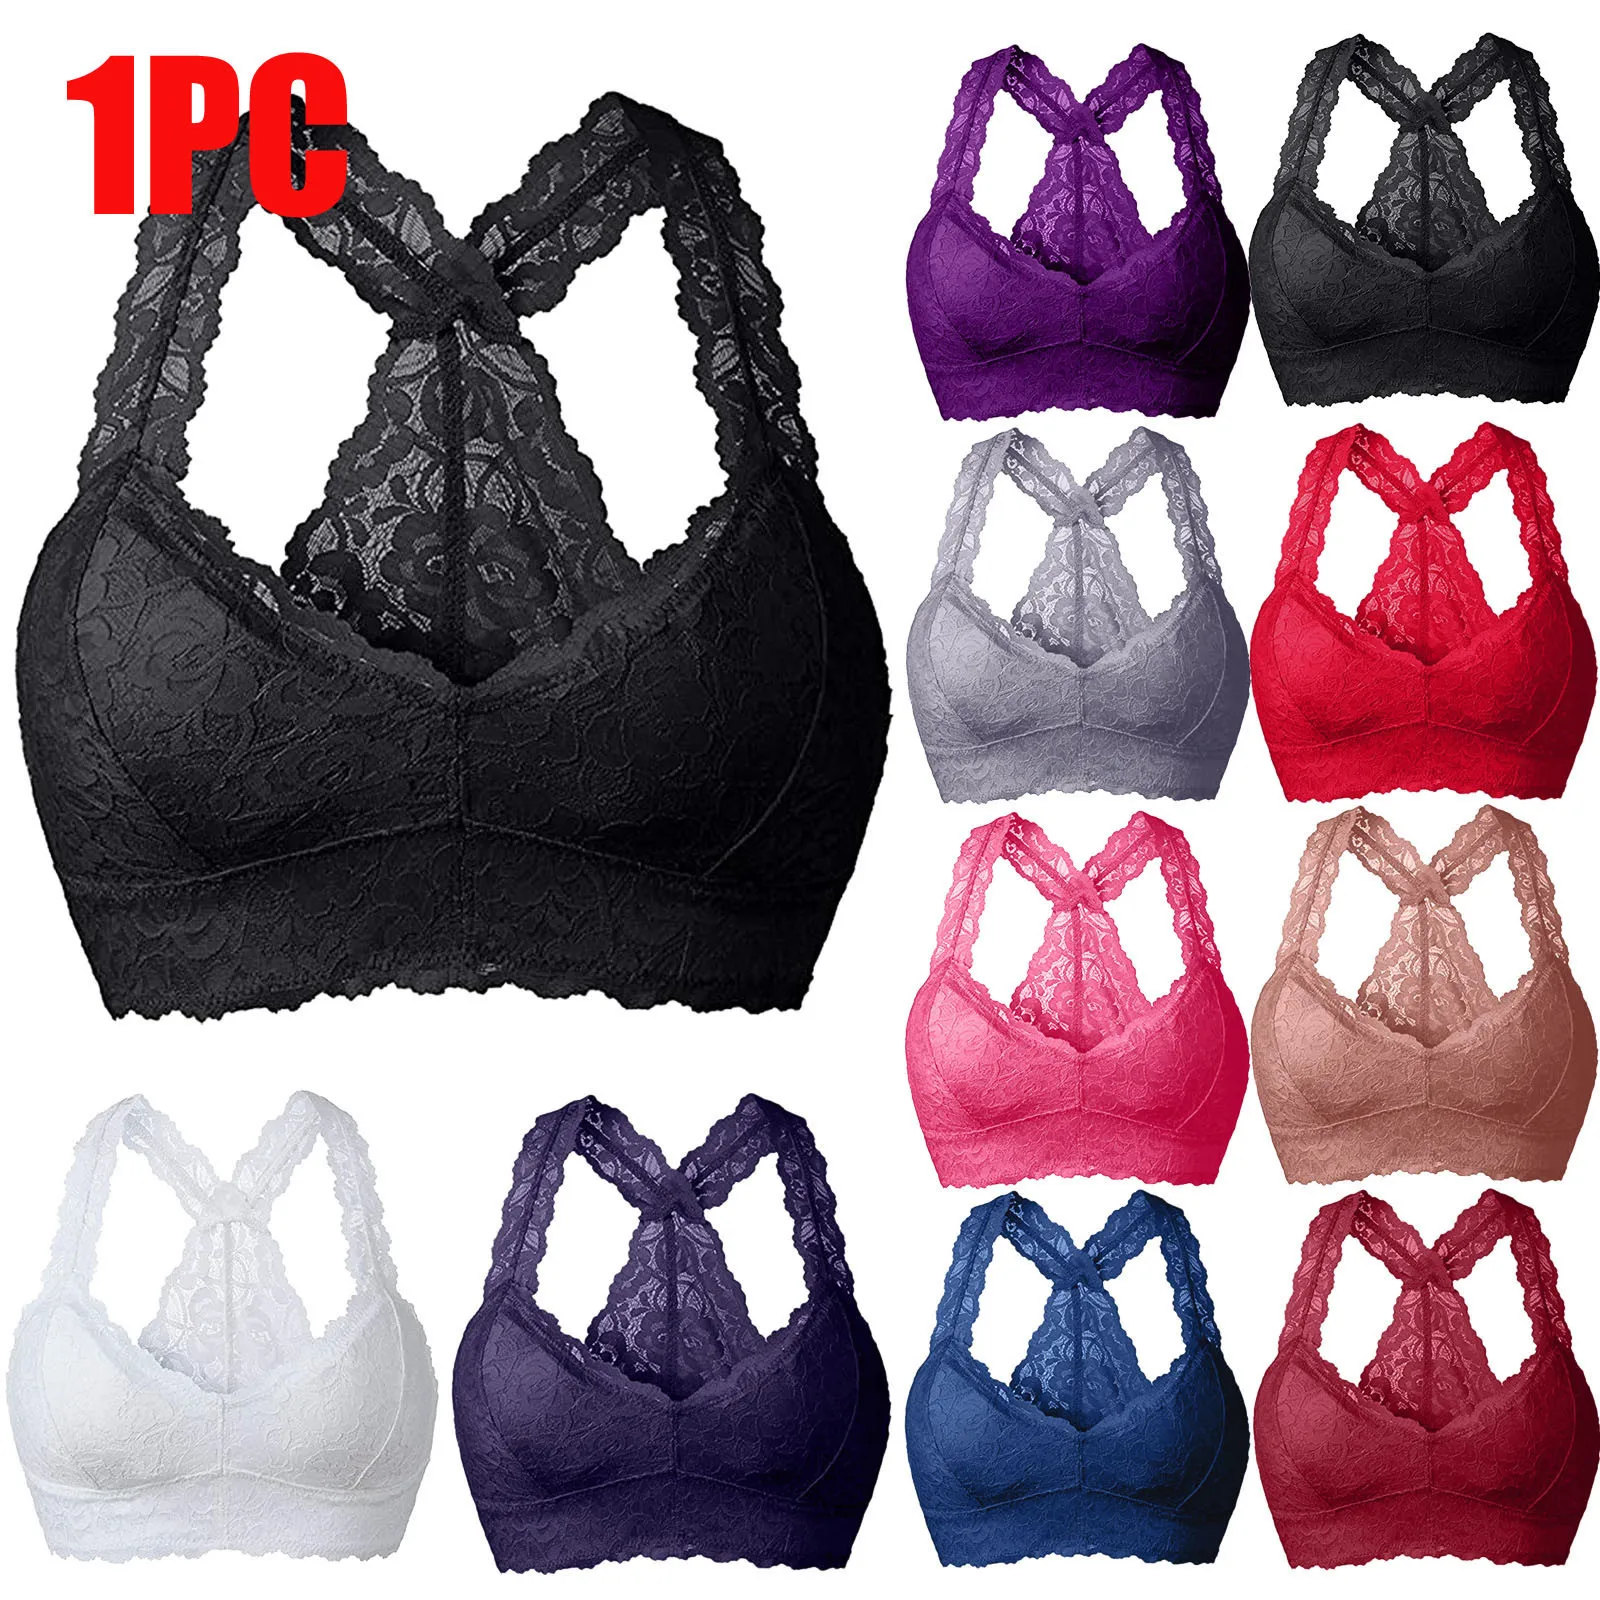 Womens Push Up Bra Lace Bralette Sexy Lingerie Tops Padded